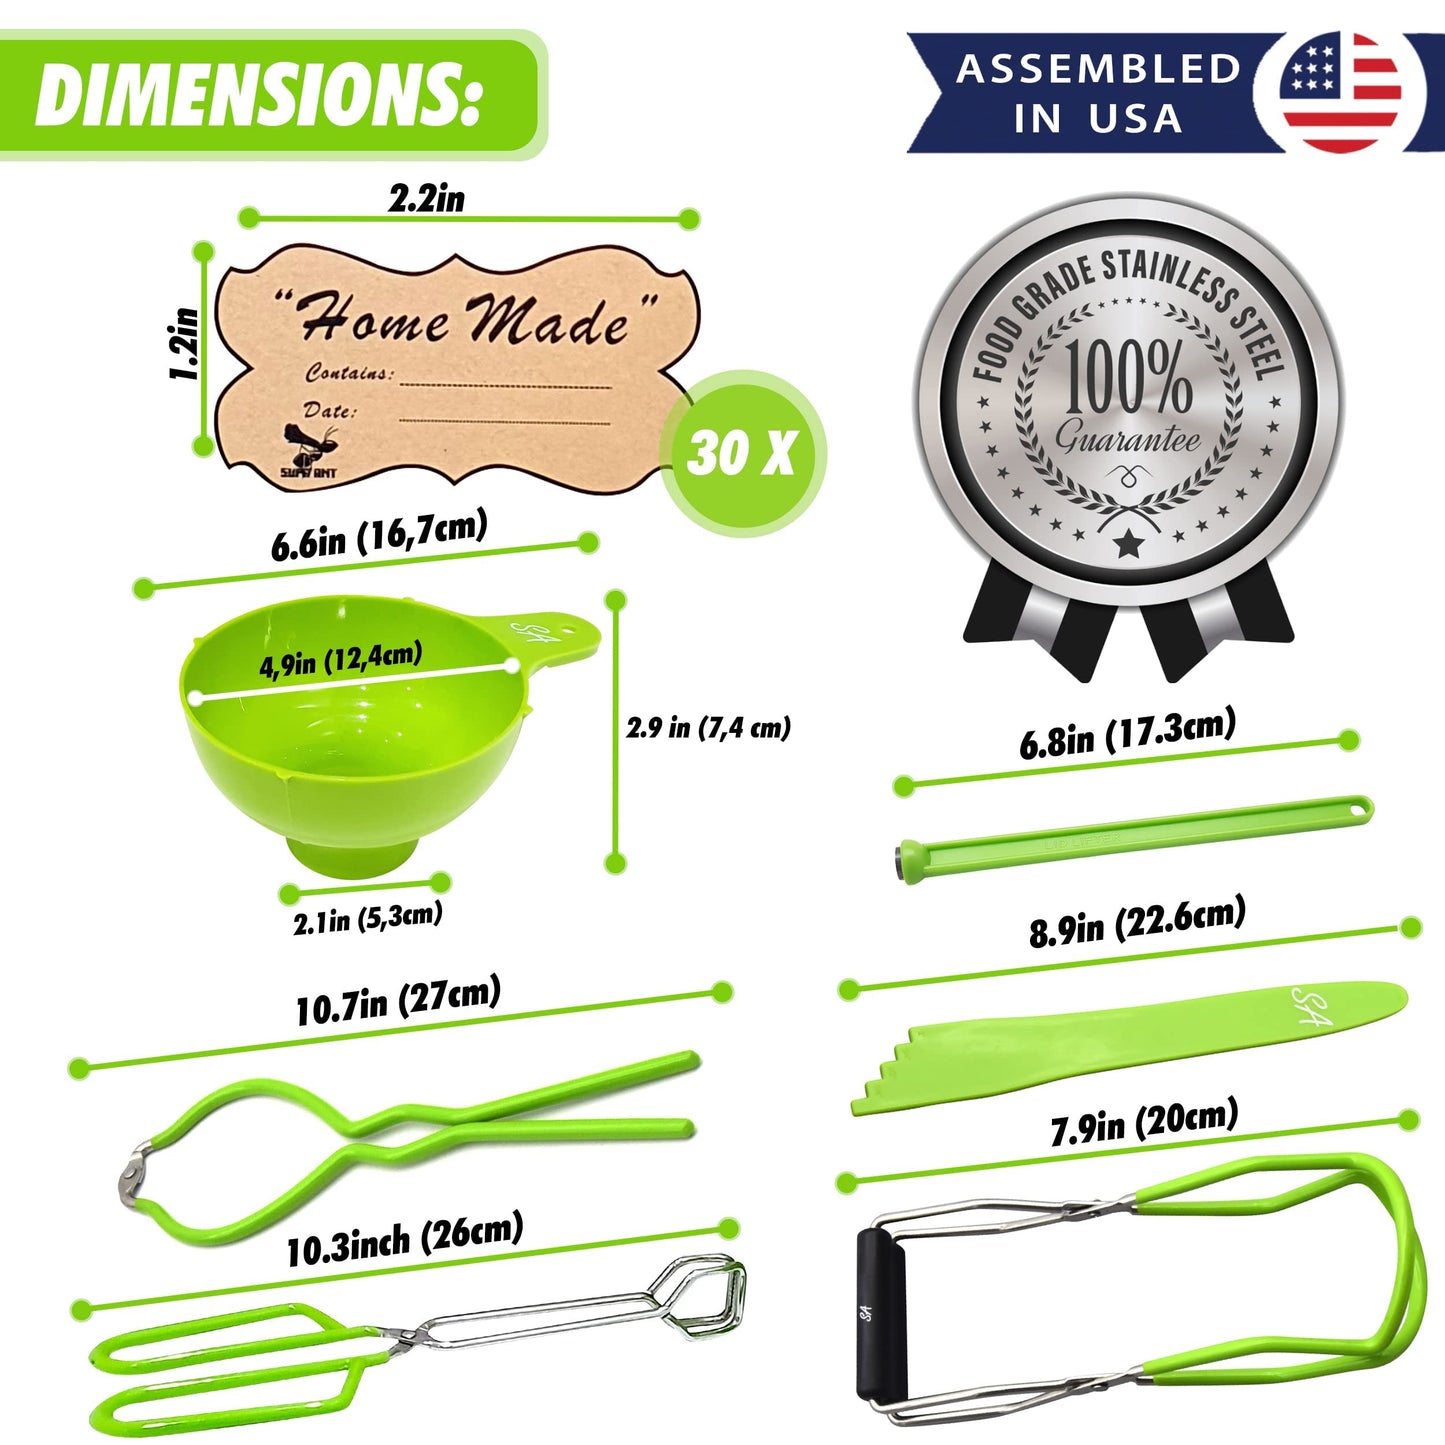 Supa Ant Canning Supplies - USA Assembled & Certified Food Grade Stainless Steel Canning tools - Canning set/pickling kit for beginners - Canning kit includes extra wide mouth funnel for mason jars